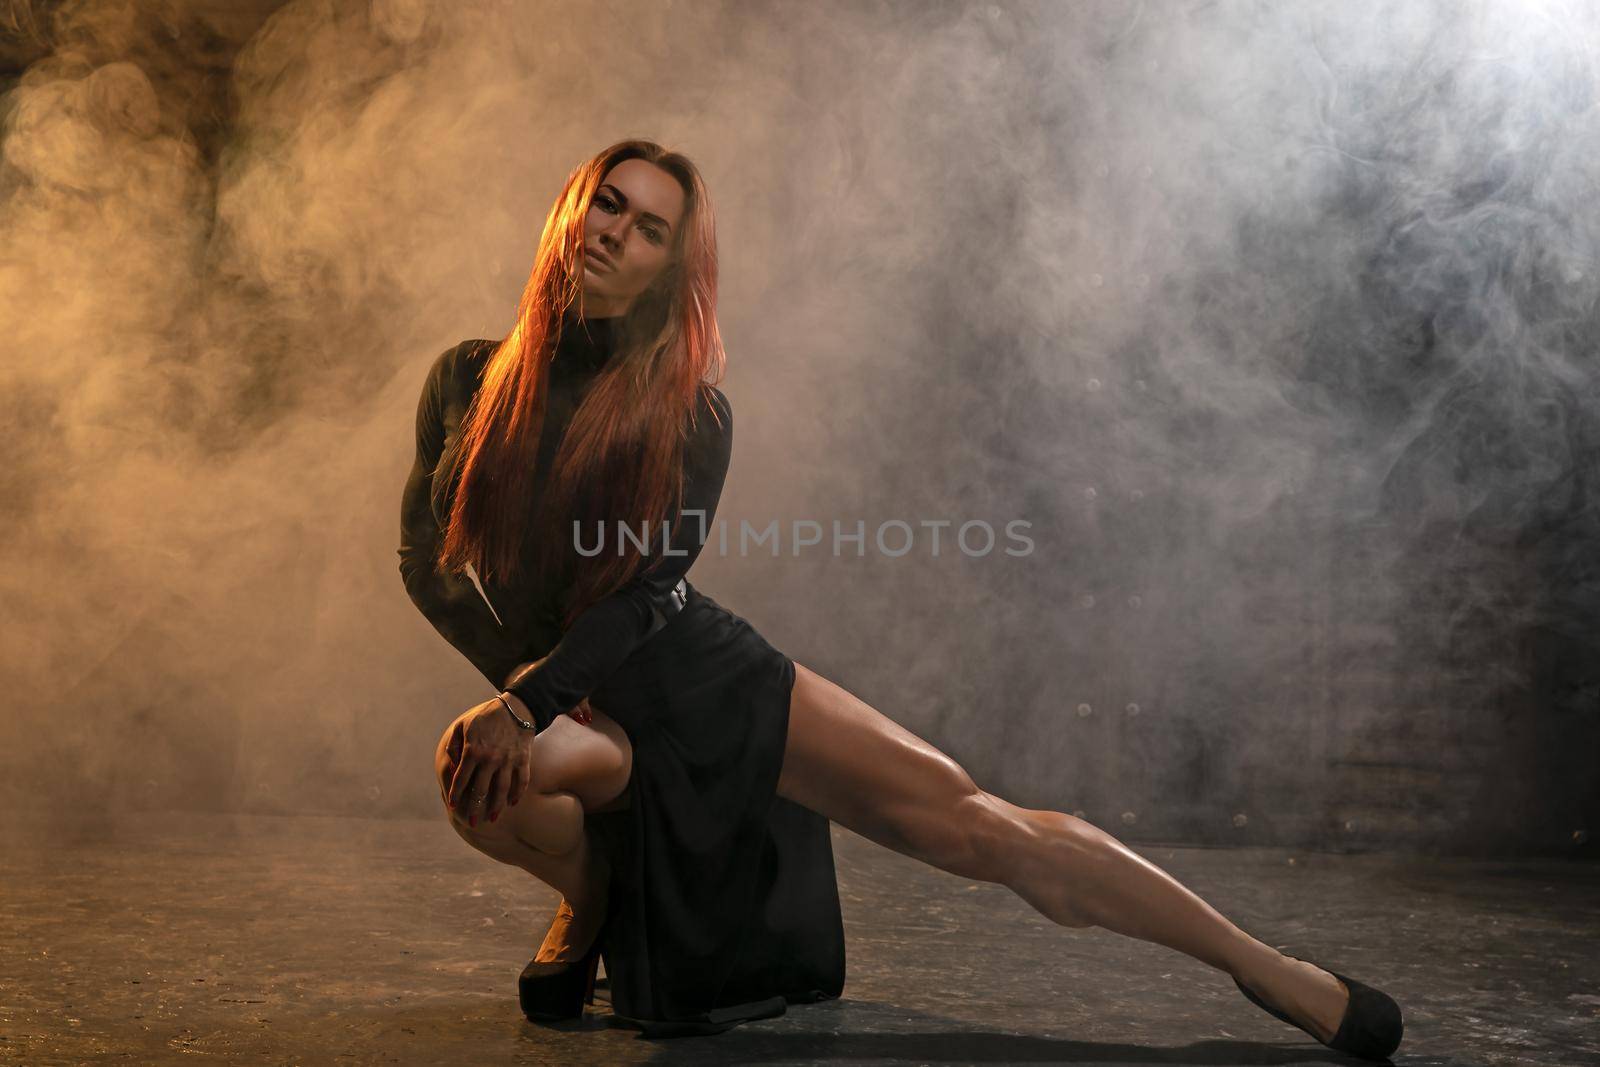 Attractive redhead girl in black dress demonstrates athletic legs in the smoke